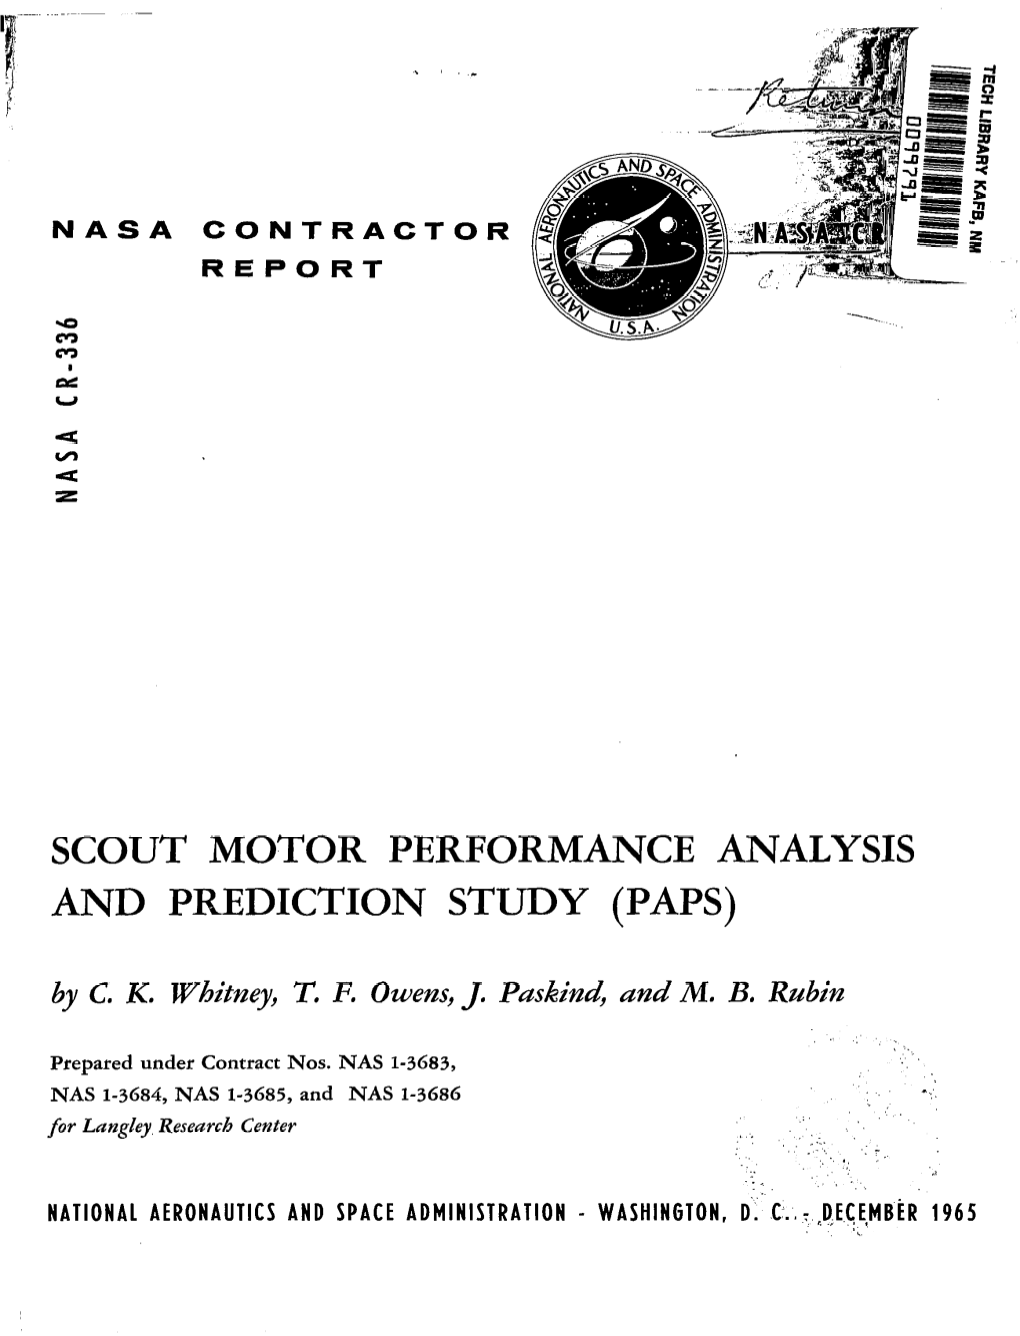 Scout Motor Performance Analysis and Prediction Study (Paps)